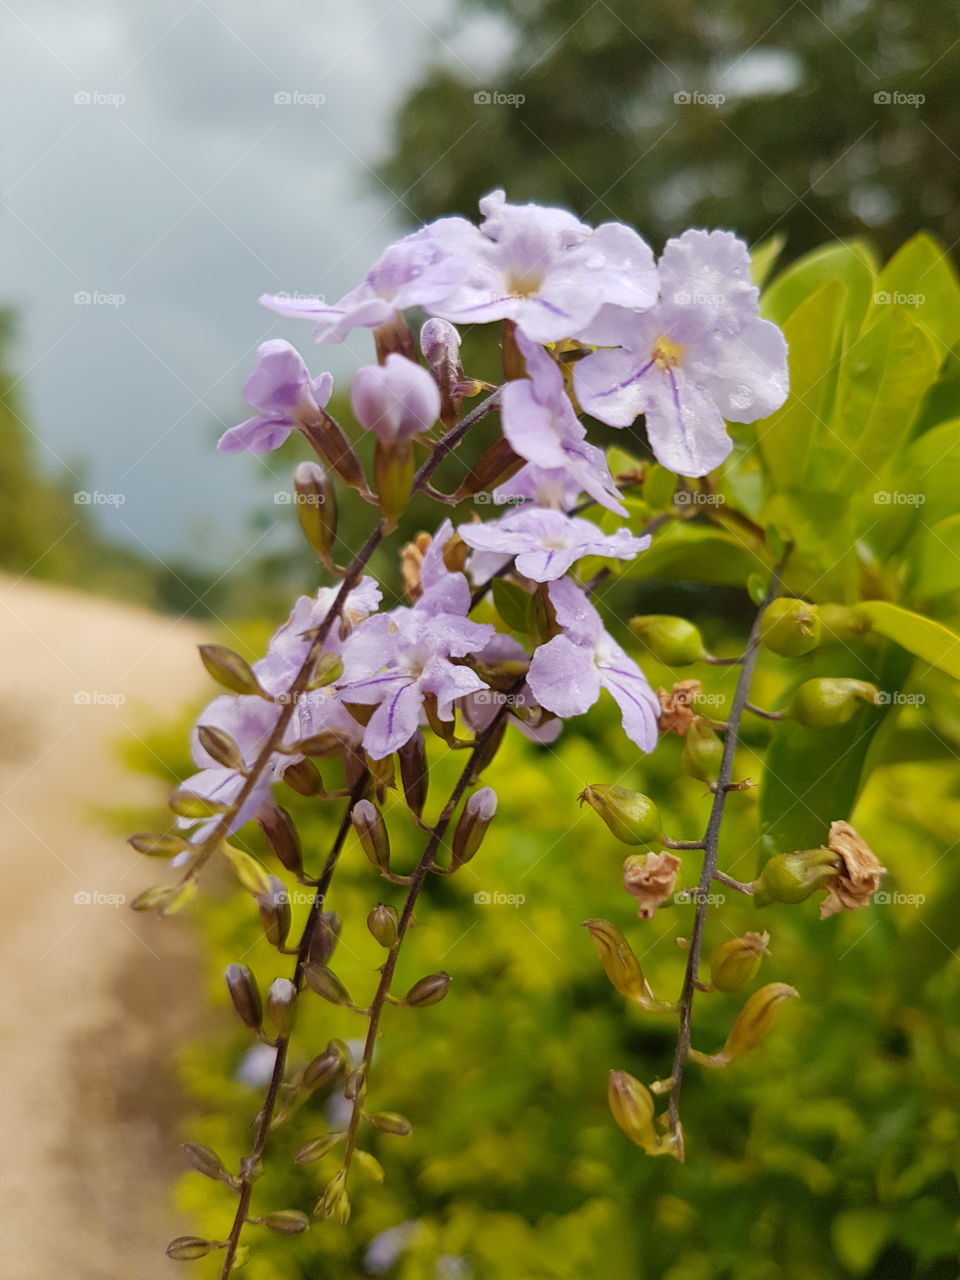 Purple flowers in contrast to the green, berries and the dirt road, simply spectacular! Brazil.